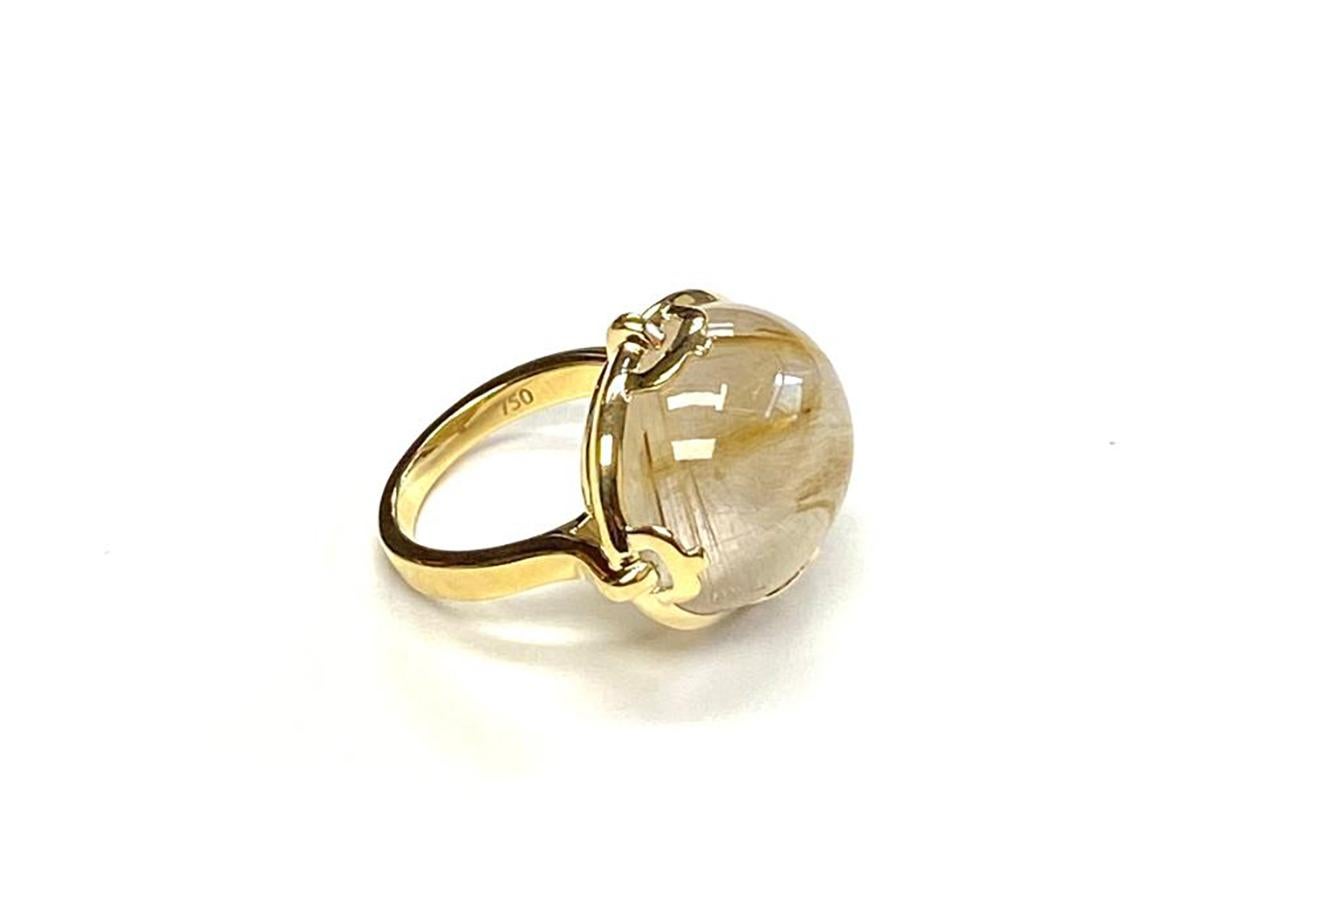 Rutilated Oval Cabochon Ring in 18K Yellow Gold, 'Limited-Edition'. Please allow 3-4 weeks for this item to be delivered. (The size of the ring can be adapted as per request)

Stone Size: 20 x 17 mm

Approx. Stone Wt: Wts: 24.61 Carats (Rutilated)